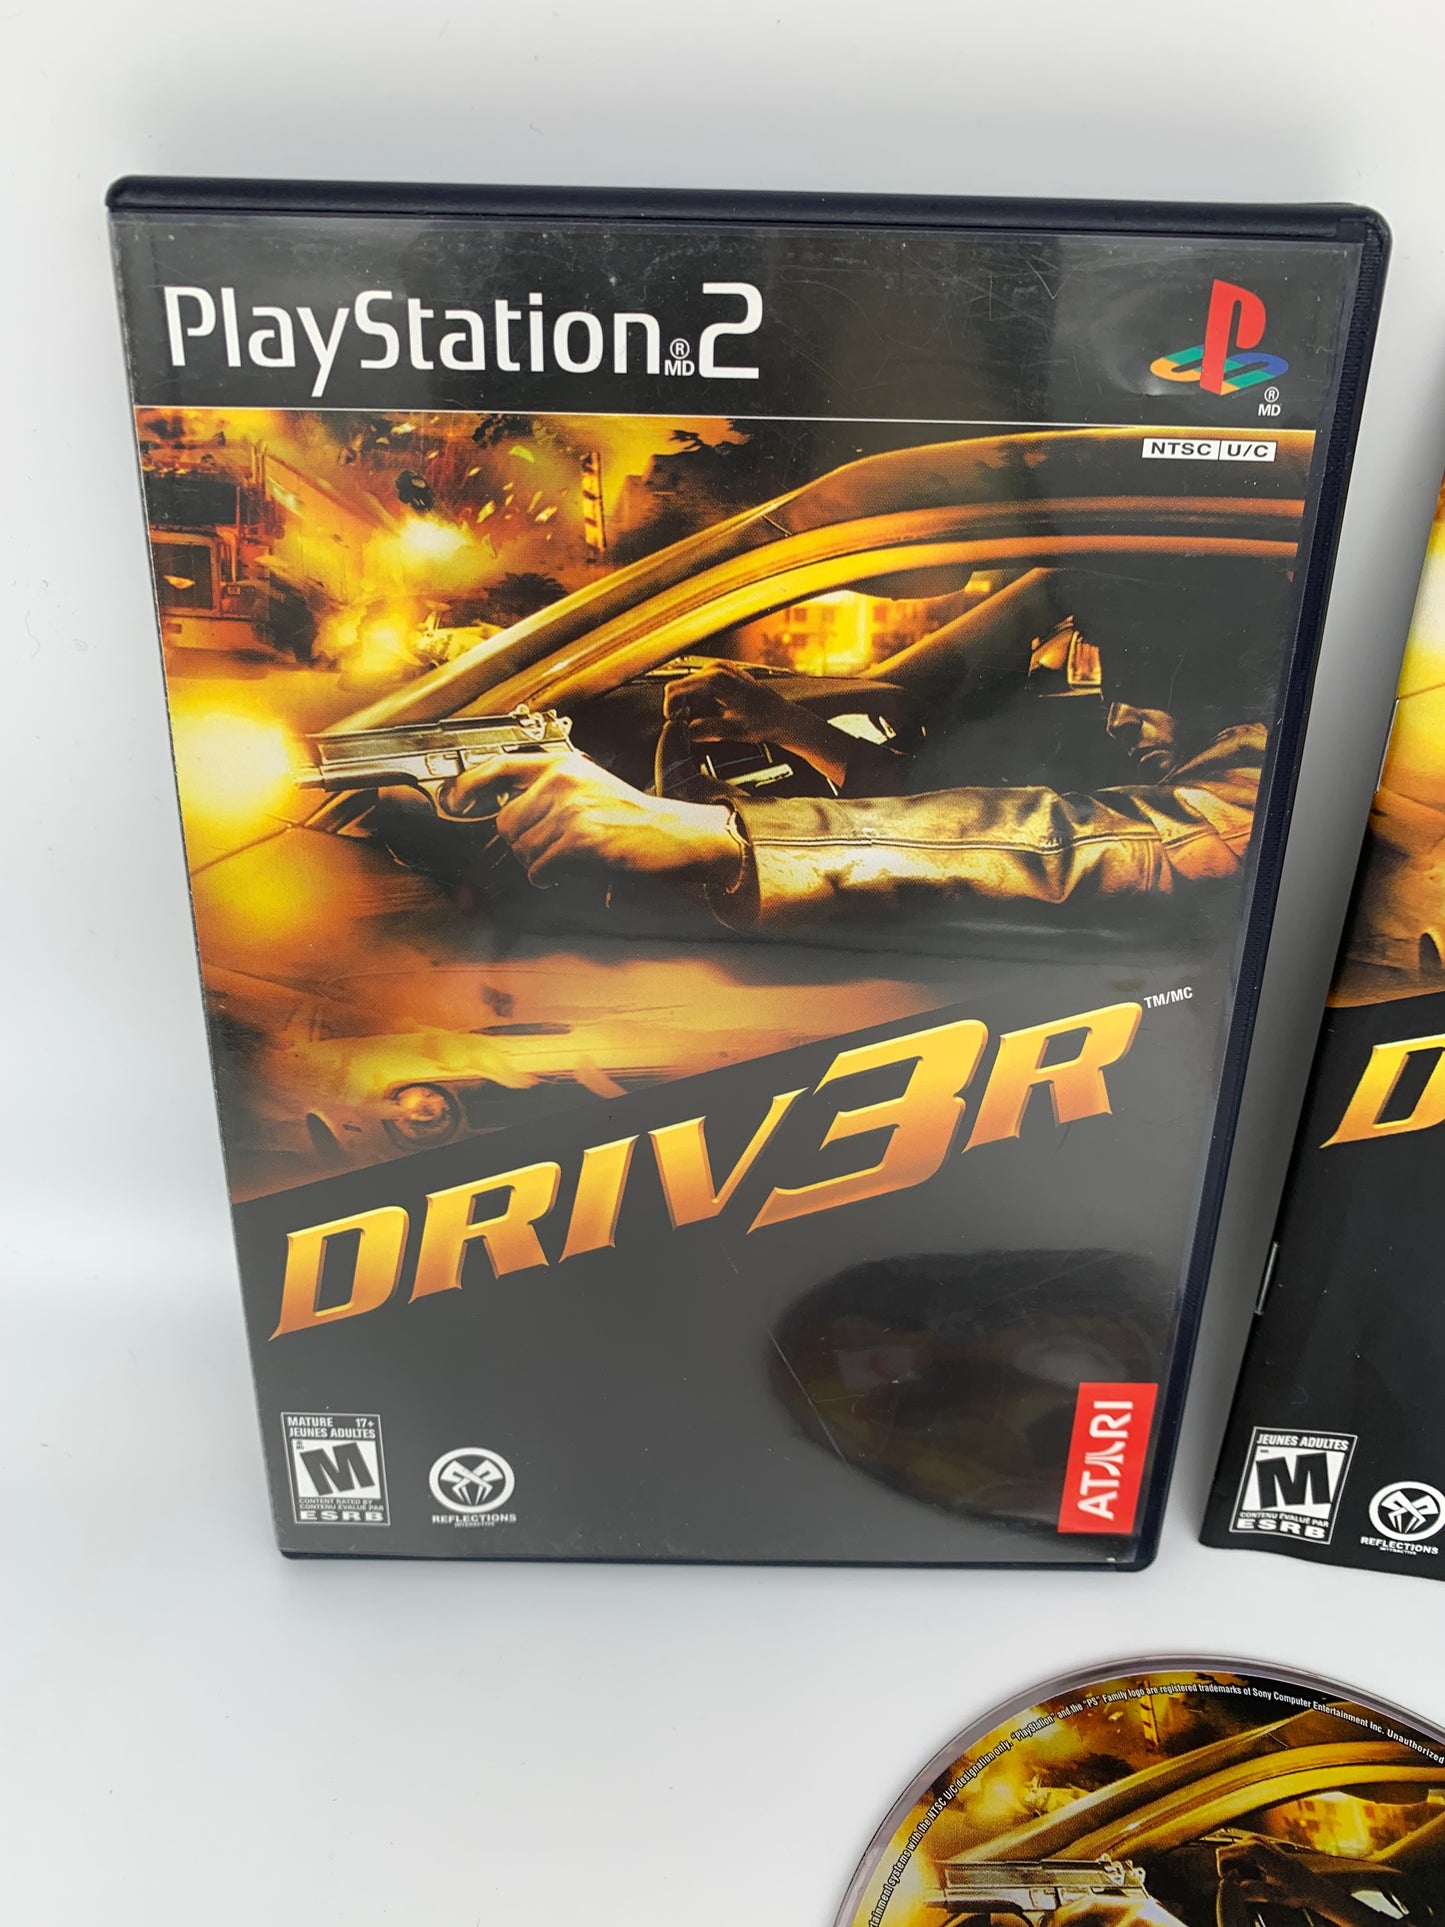 SONY PLAYSTATiON 2 [PS2] | DRiV3R DRiVER 3